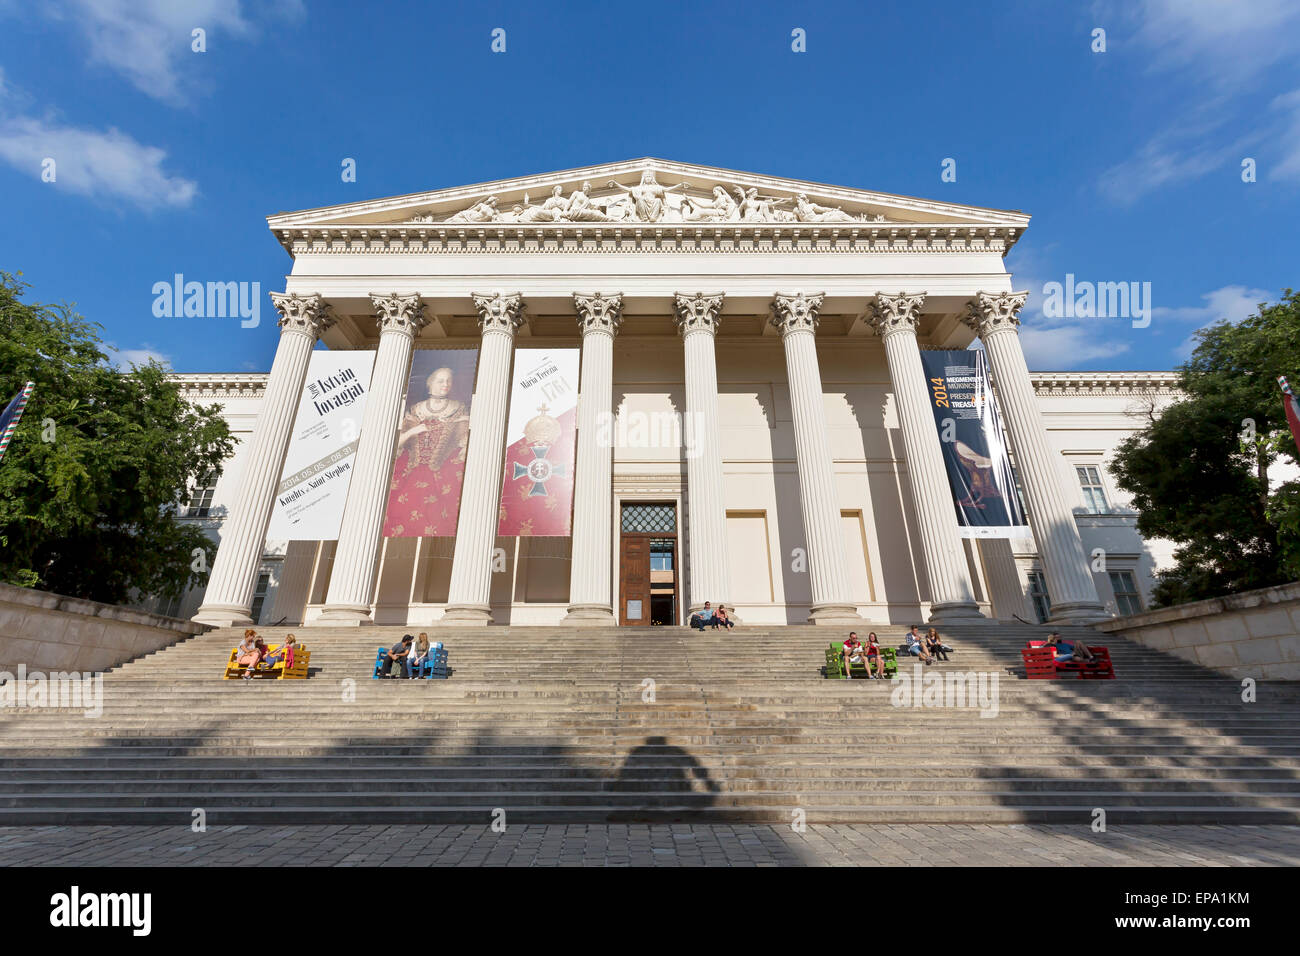 The Hungarian National Museum in Budapest, Hungary. Stock Photo